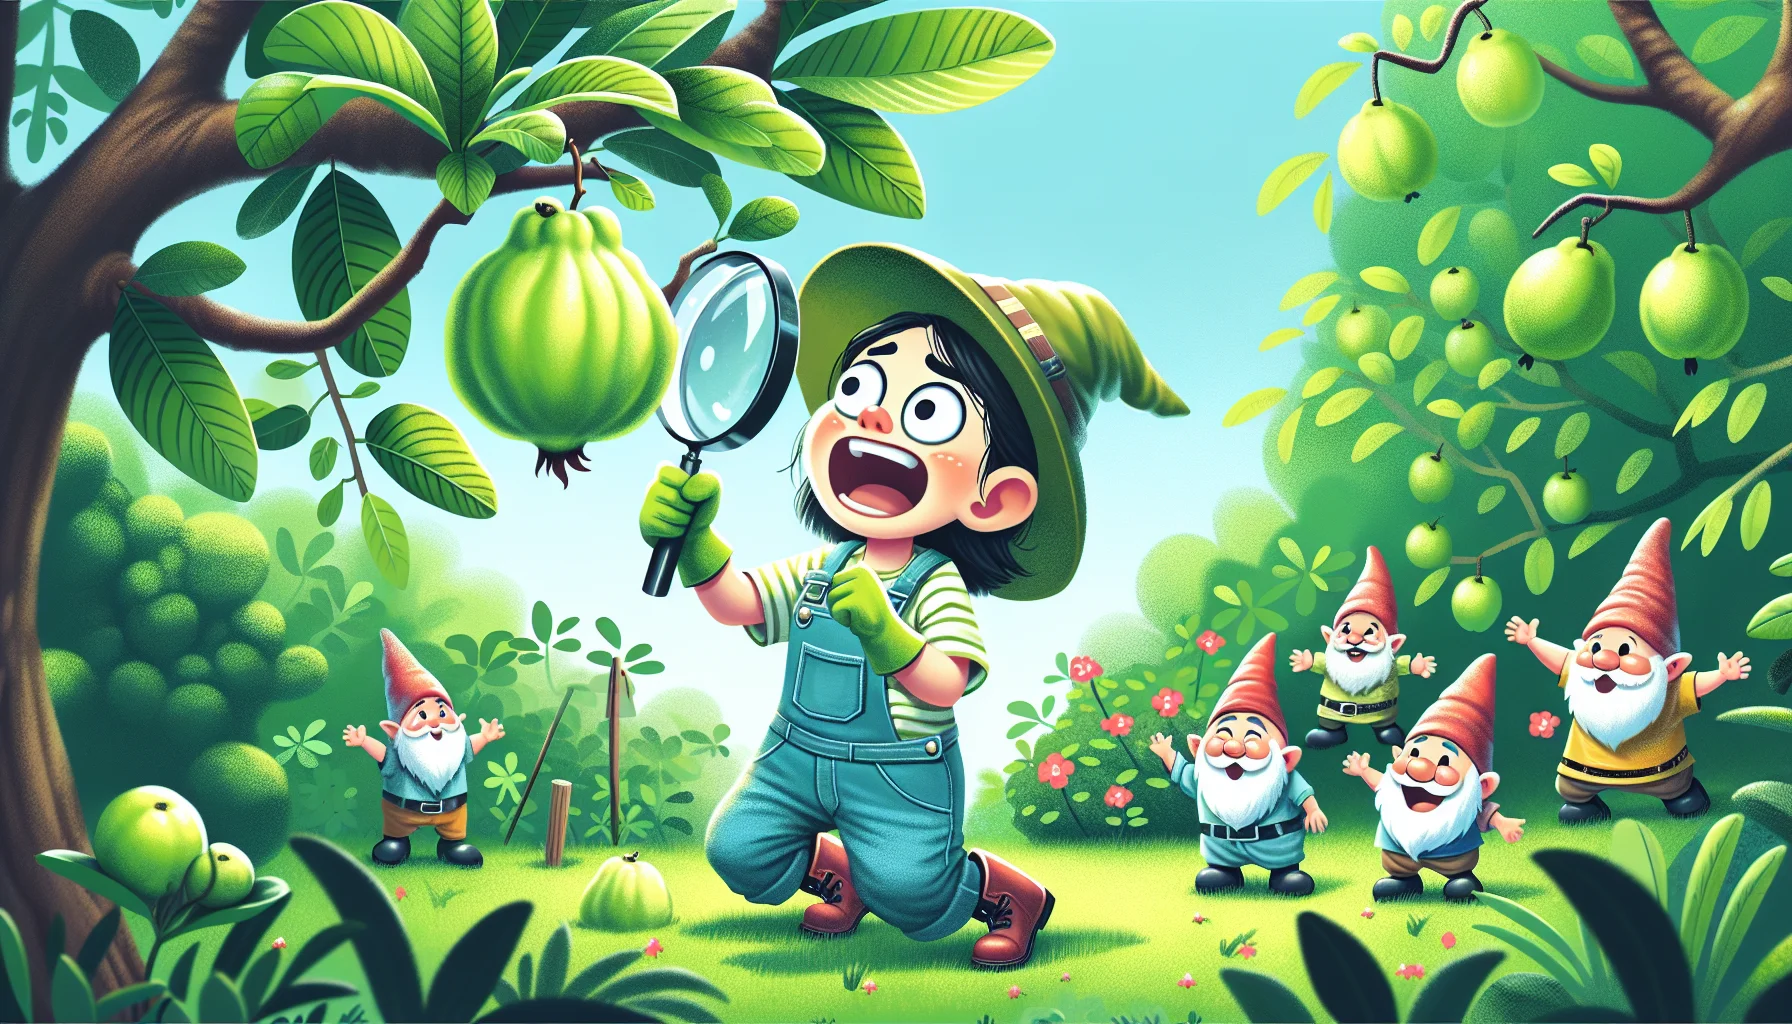 Illustrate a humorous and lighthearted scene revolving around the ripening of a guava fruit in a lush garden. A gardener with Asian descent and female gender is seen anxiously observing the guava tree with a magnifying glass, jumping with joy when she notices the guava turning from green to yellow, a sign of ripeness. She's humorously dressed in oversized gardening gear and has her garden gnome compatriots, laughing and cheering her on. Bring this lively scene to life in a way that promotes the joy of gardening and the rewards of patiently waiting for nature's gifts.